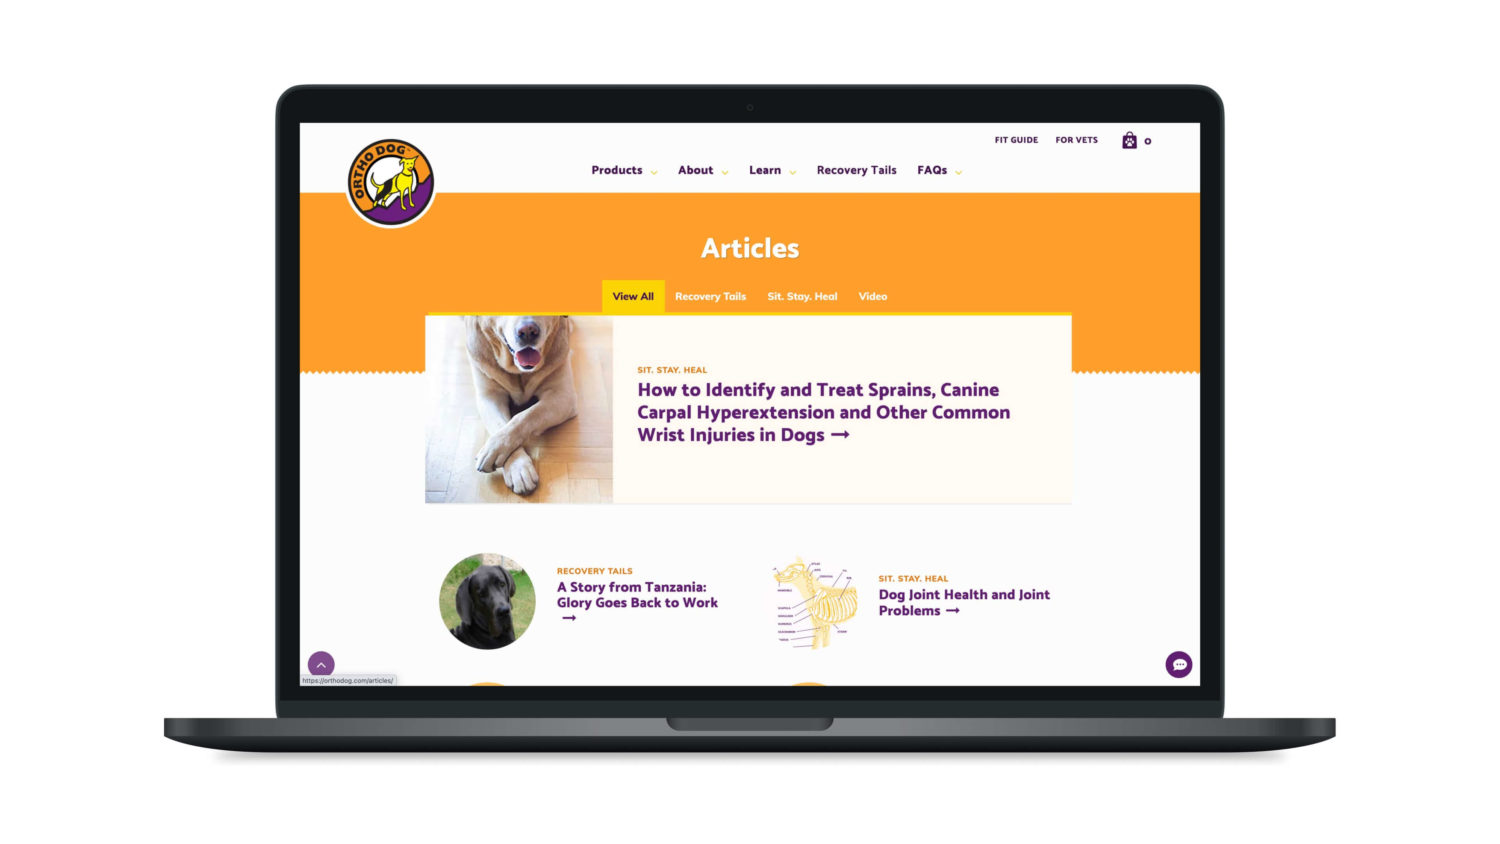 Ortho Dog website articles index view